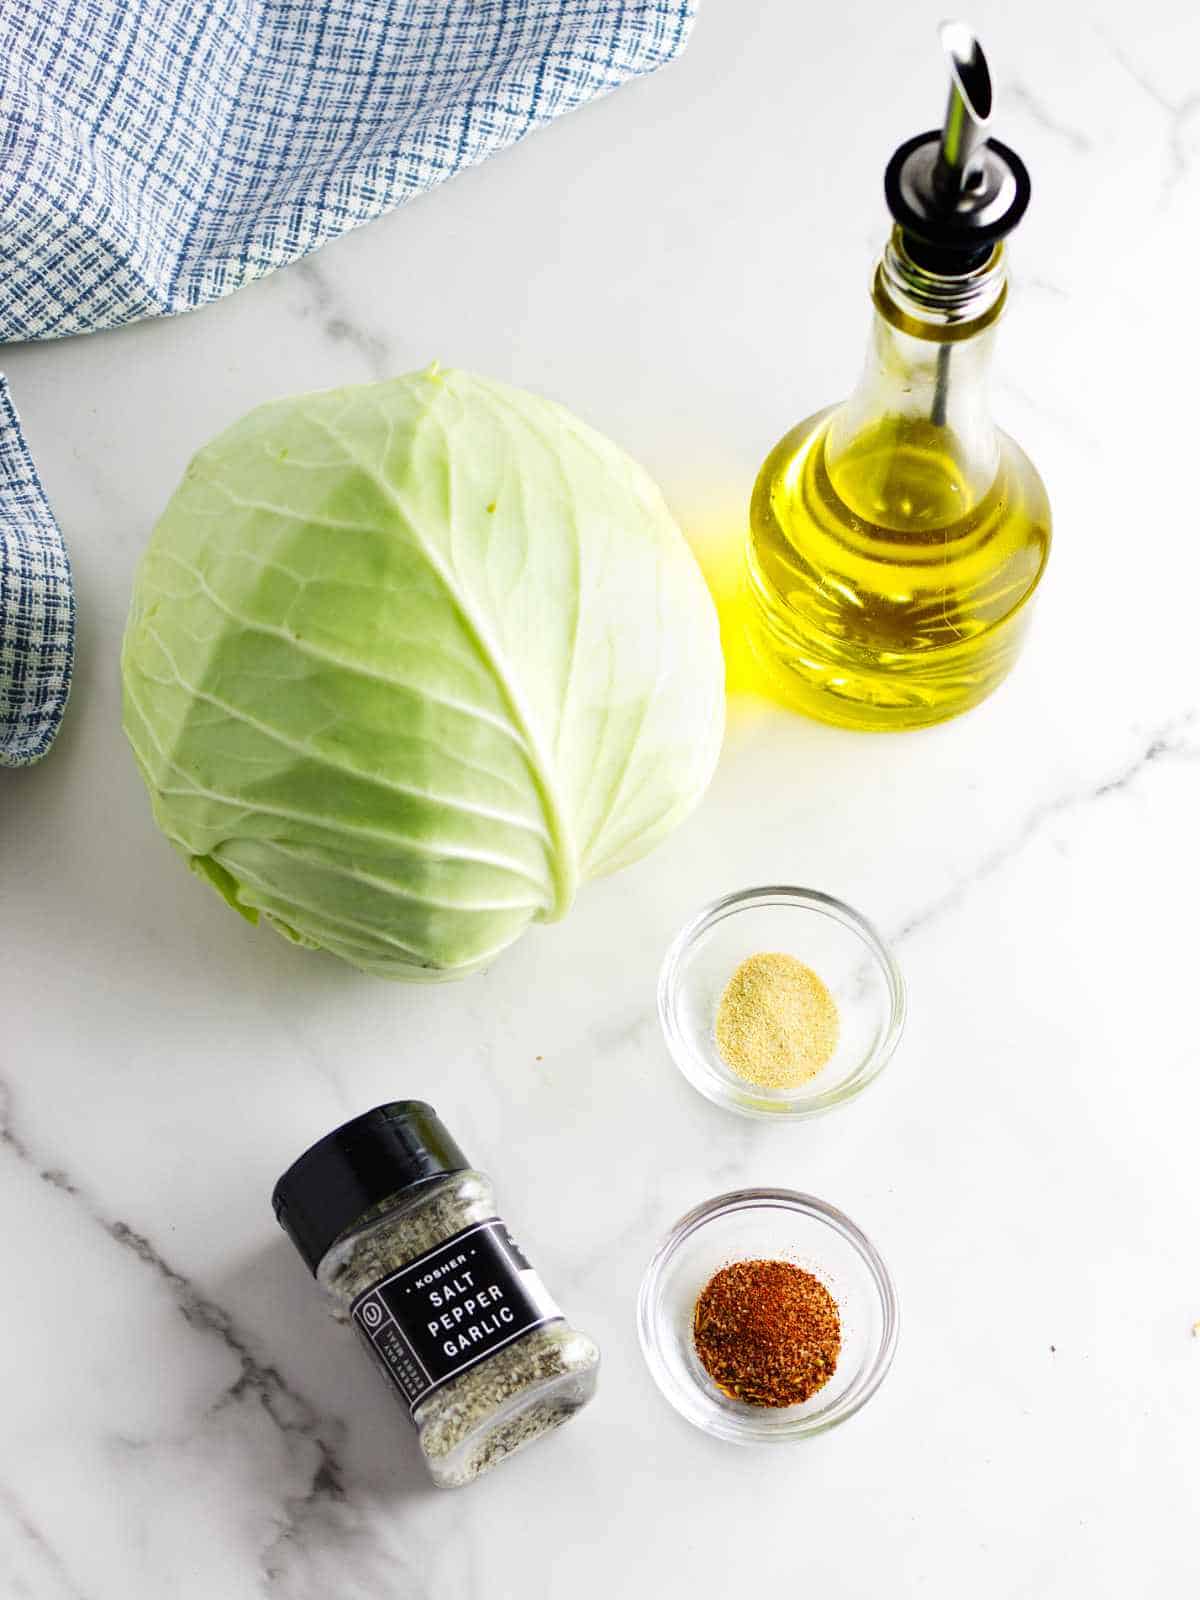 head of cabbage, oil, and garlic powder on a white marble background.